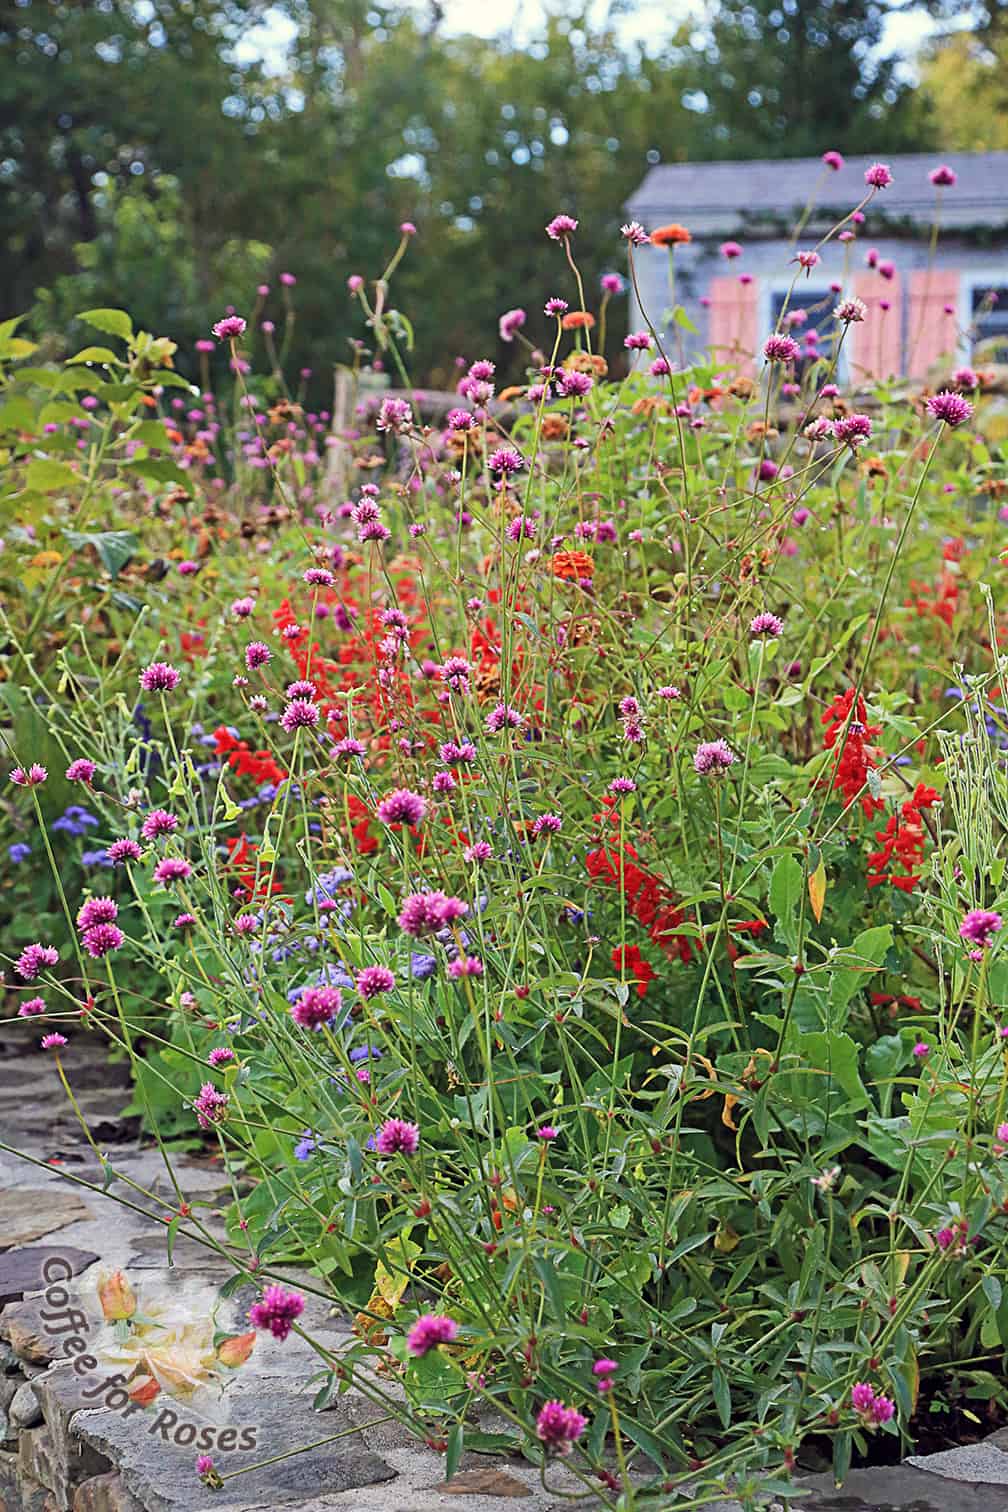 This past year I planted Annual Alley with a variety of six pack varieties along with others such as Gomphrena Fireworks that I grew from seed. I love the way the round pink flowers of the Gomphrena contrast with the spiky red salvia.